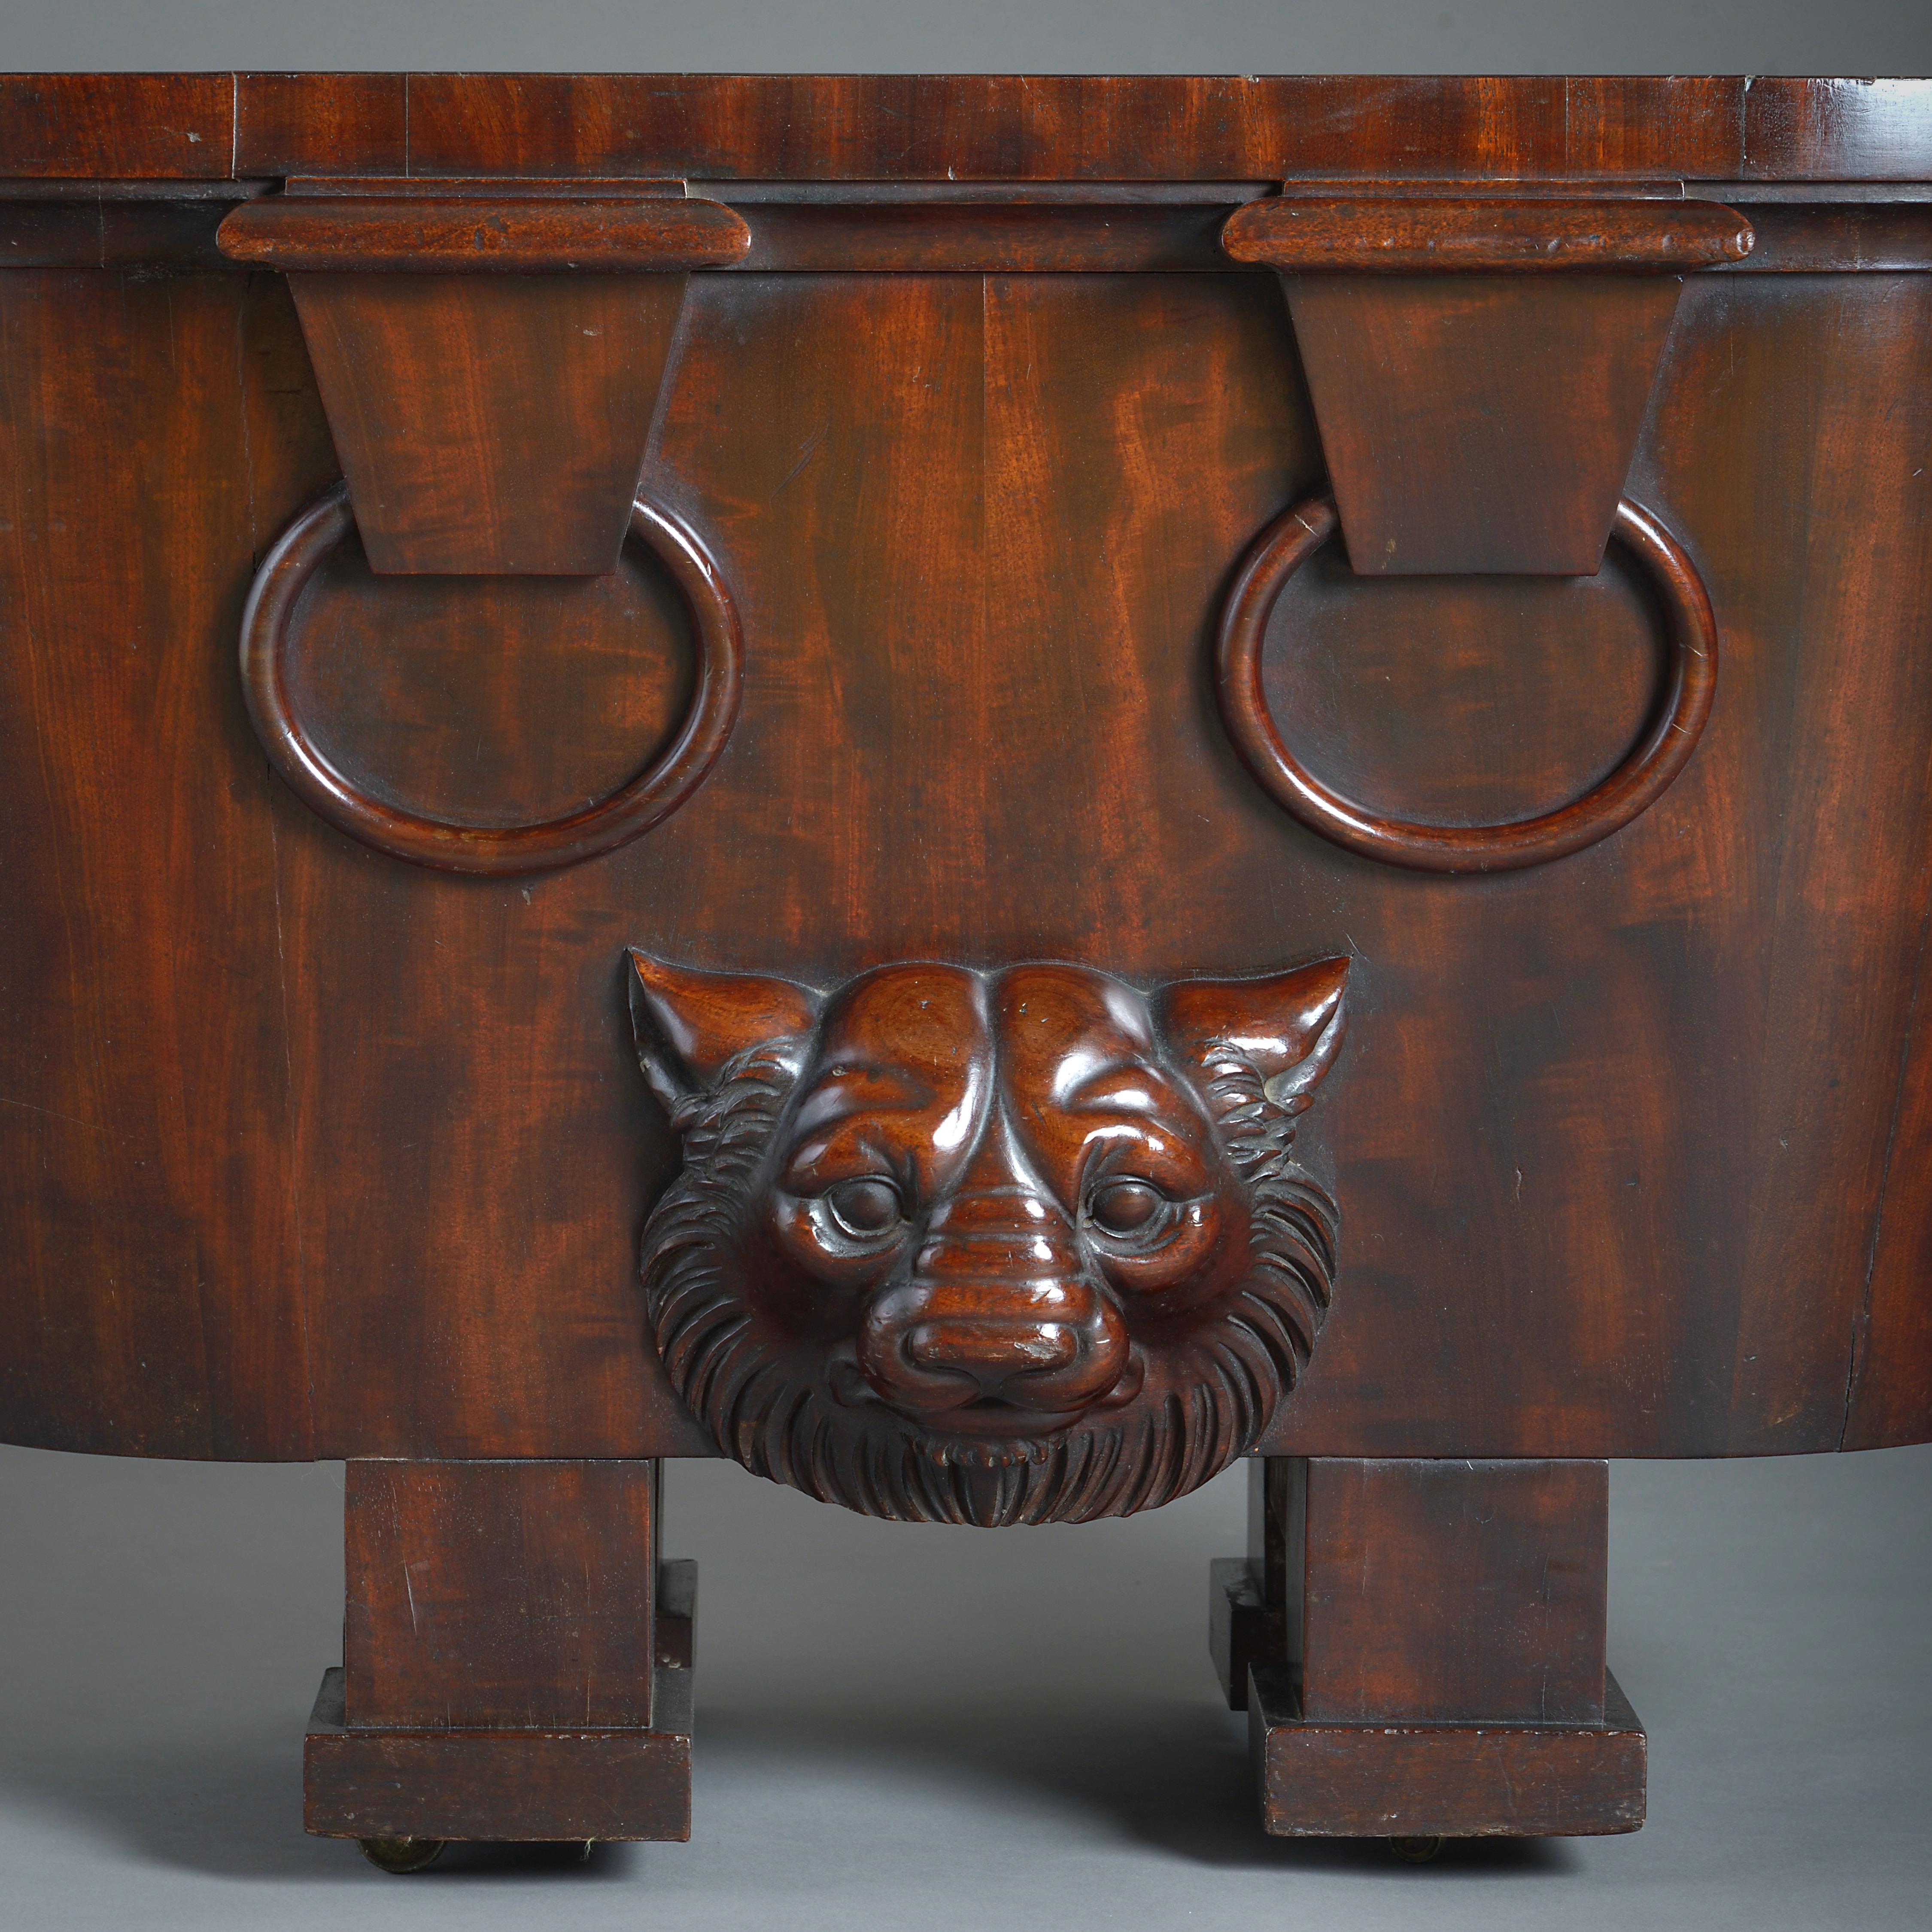 Regency Mahogany Wine-Cooler after a design by Thomas Hope For Sale 2